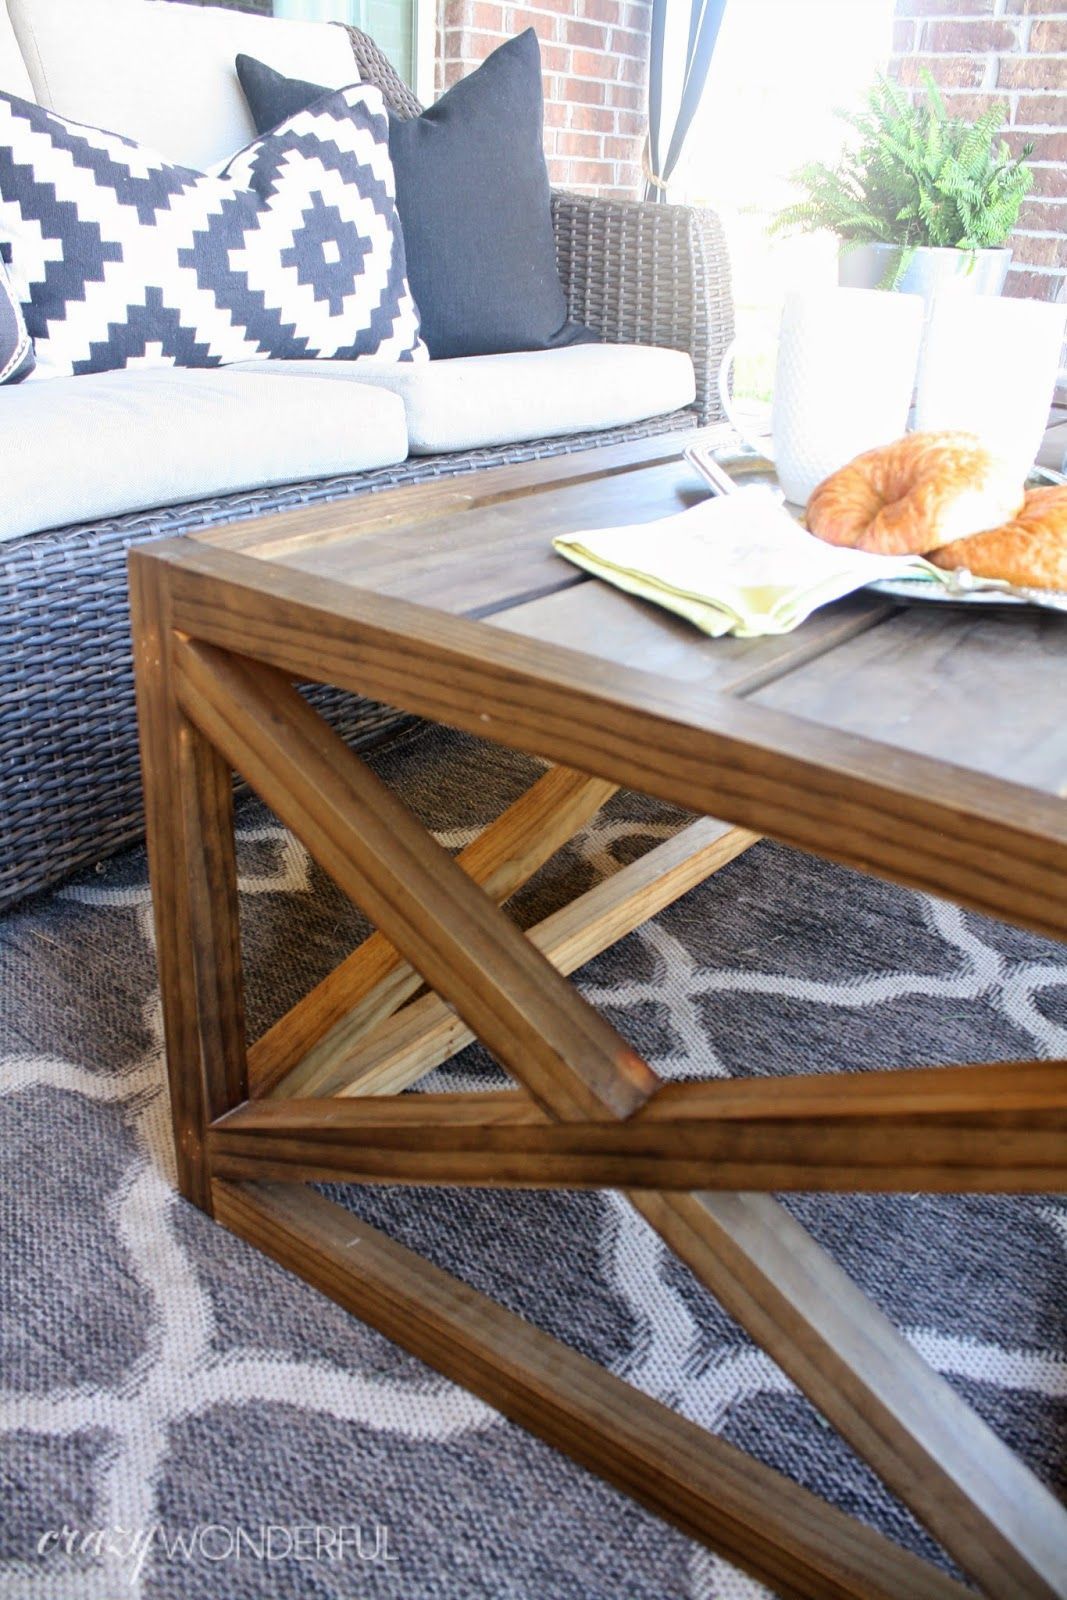 Diy Outdoor Coffee Table | With Storage – Crazy Wonderful | Outdoor With Regard To Outdoor Coffee Tables With Storage (Gallery 18 of 20)